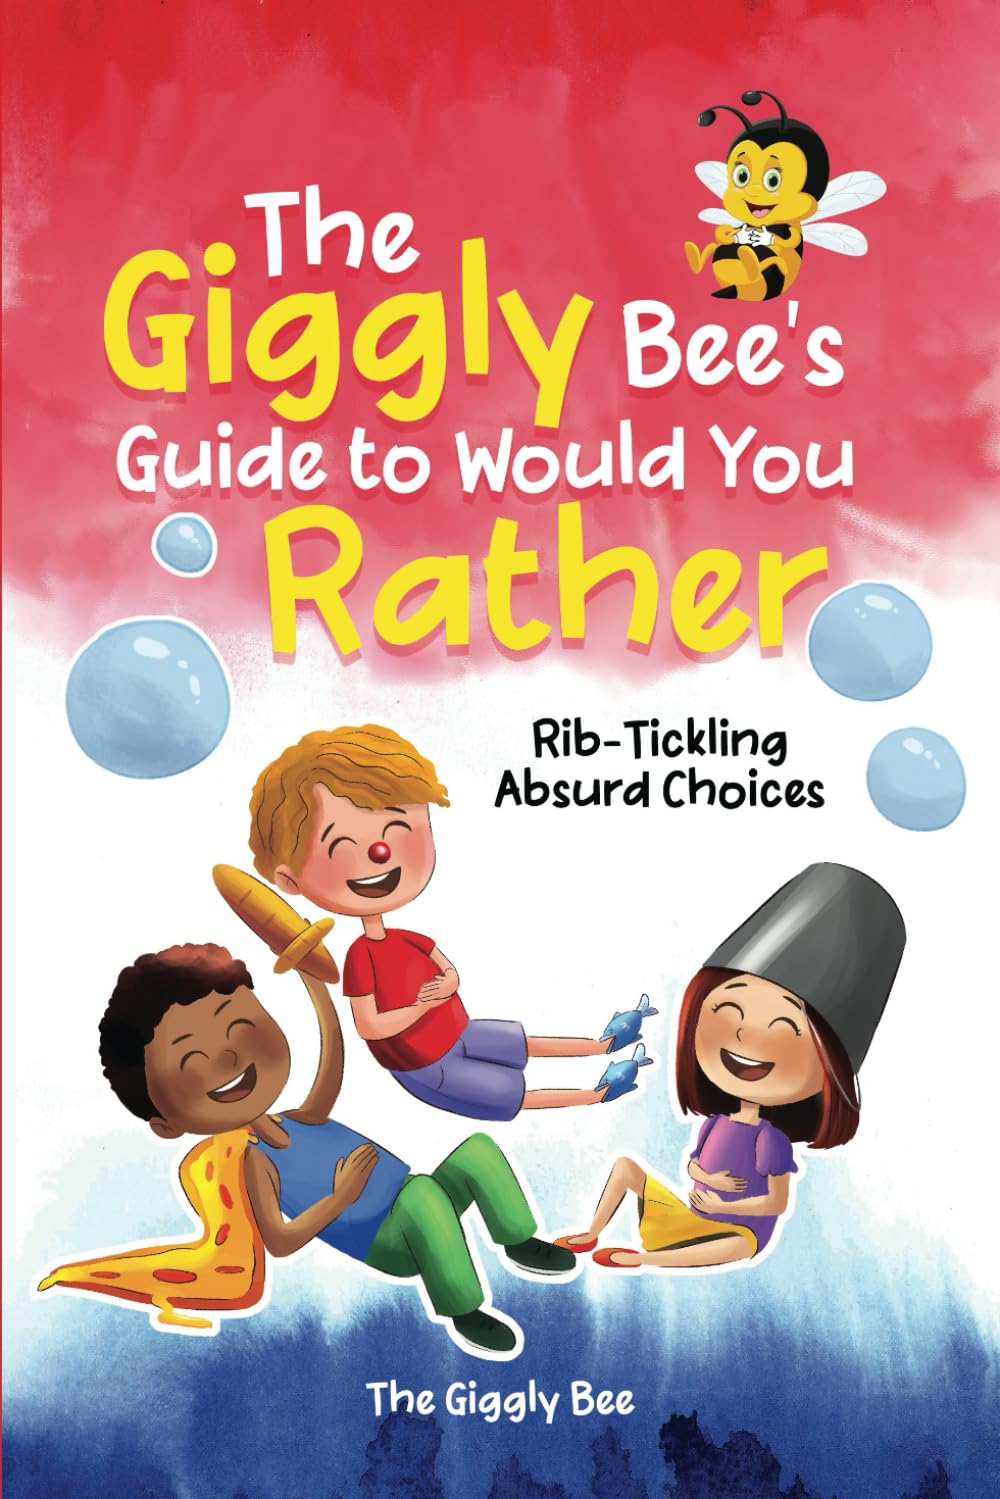 The Giggly Bee Announces the Release of "The Giggly Bee’s Guide to Would You Rather" - A New Book for Kids That Inspires Laughter and Creativity 